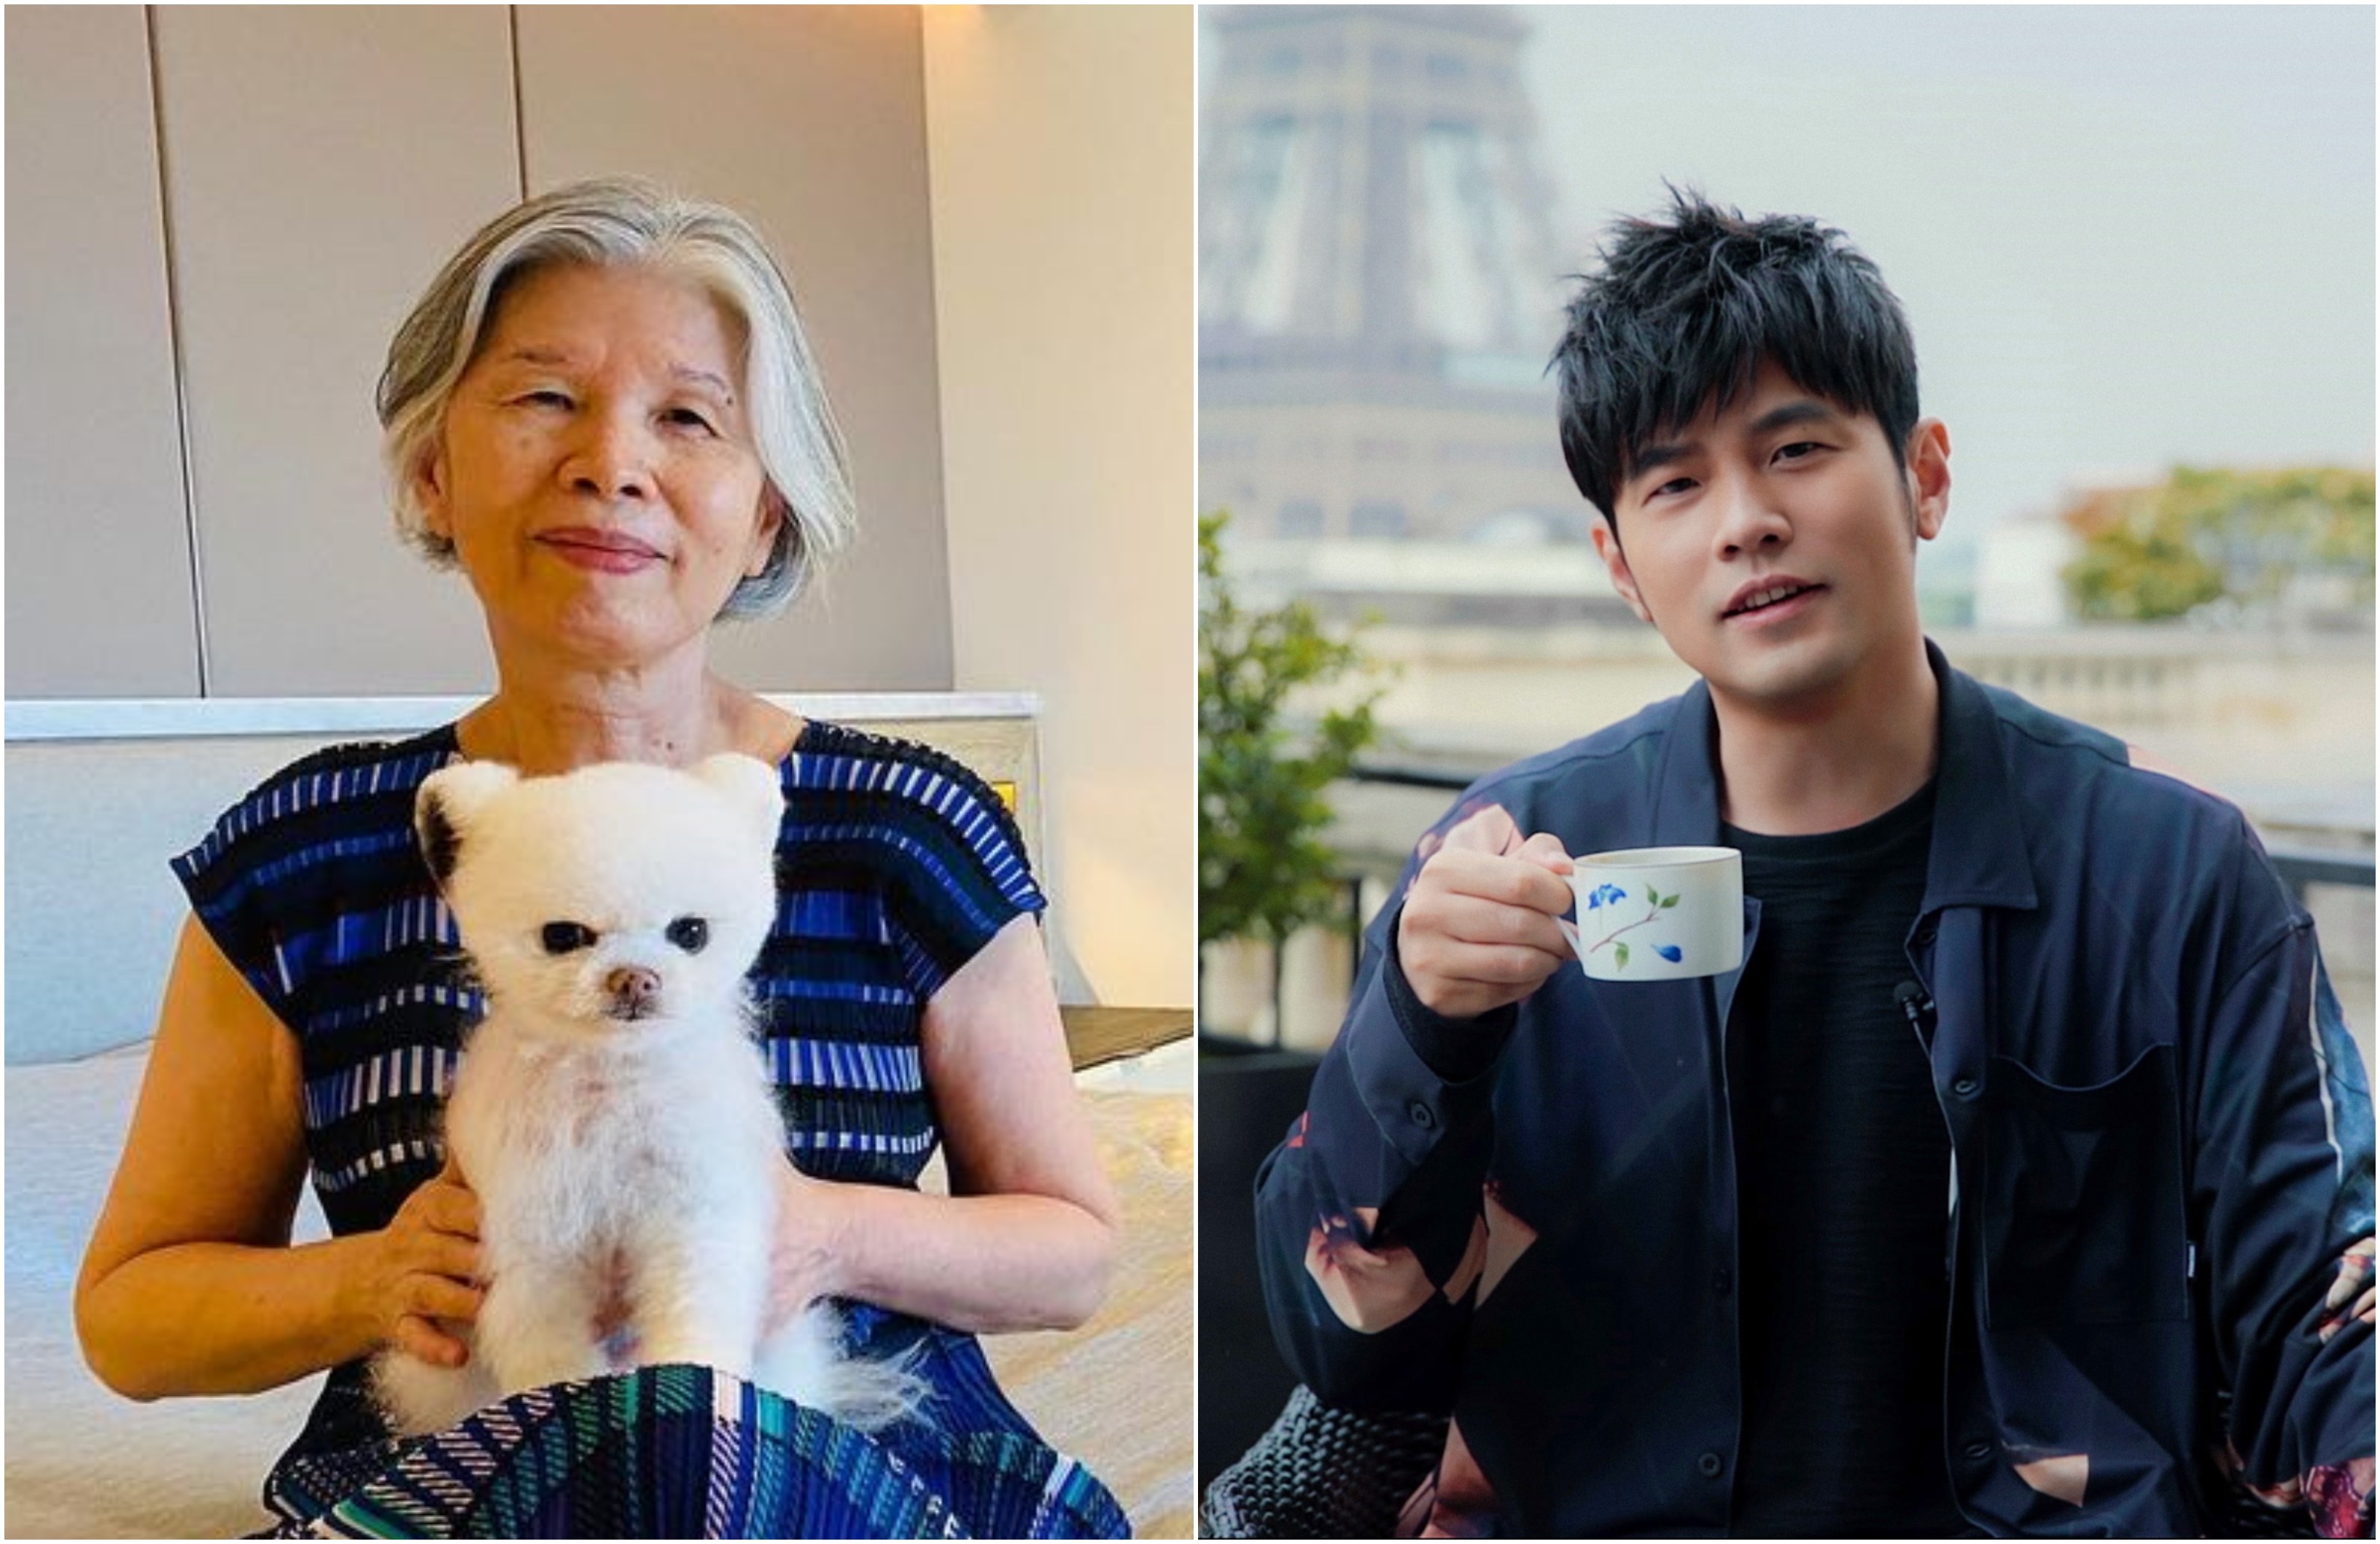 Jay Chou’s mother Ye Hui-mei is set to become very rich thanks to the coffee brand he supports, and the Netflix show J-Style Trip pictured here. Photos: @jaychou/Instagram, Netflix